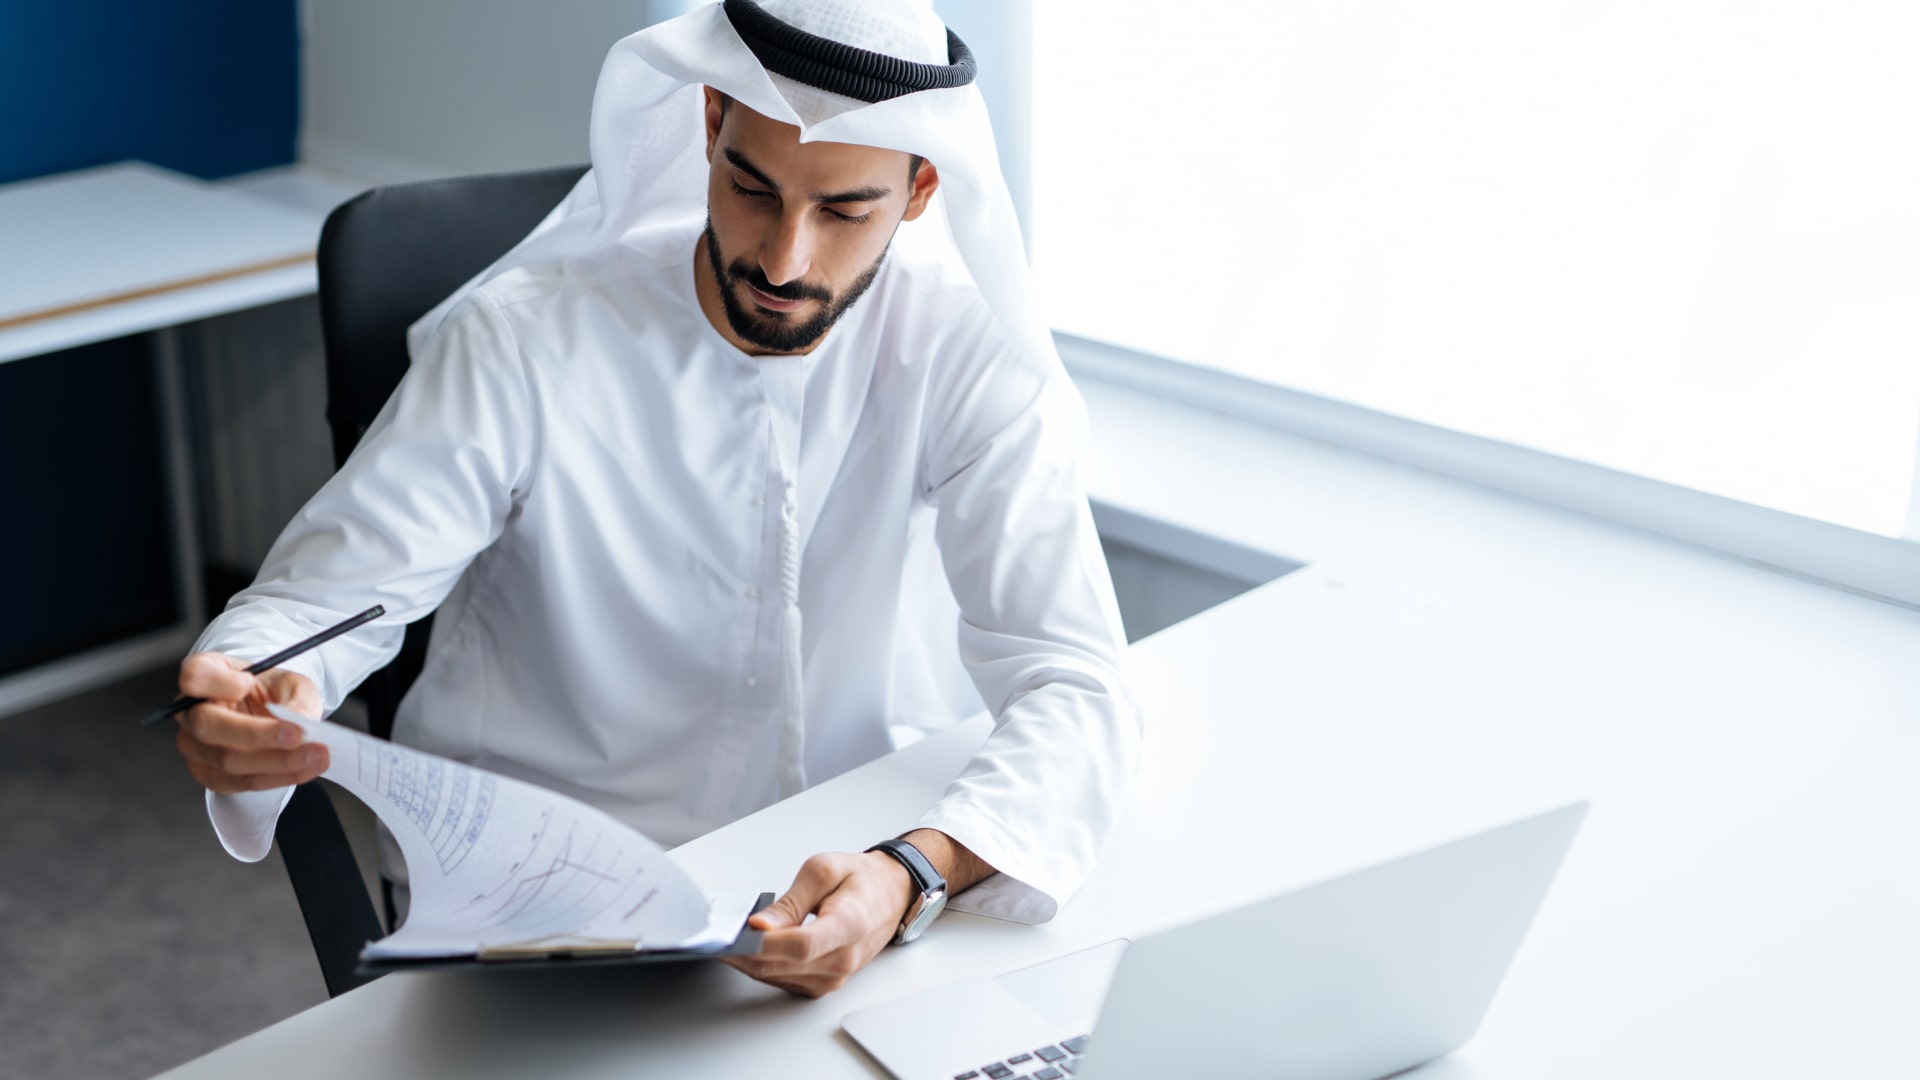 What Is Emiratisation? What Does An Emiratisation Recruitment Agency Do?